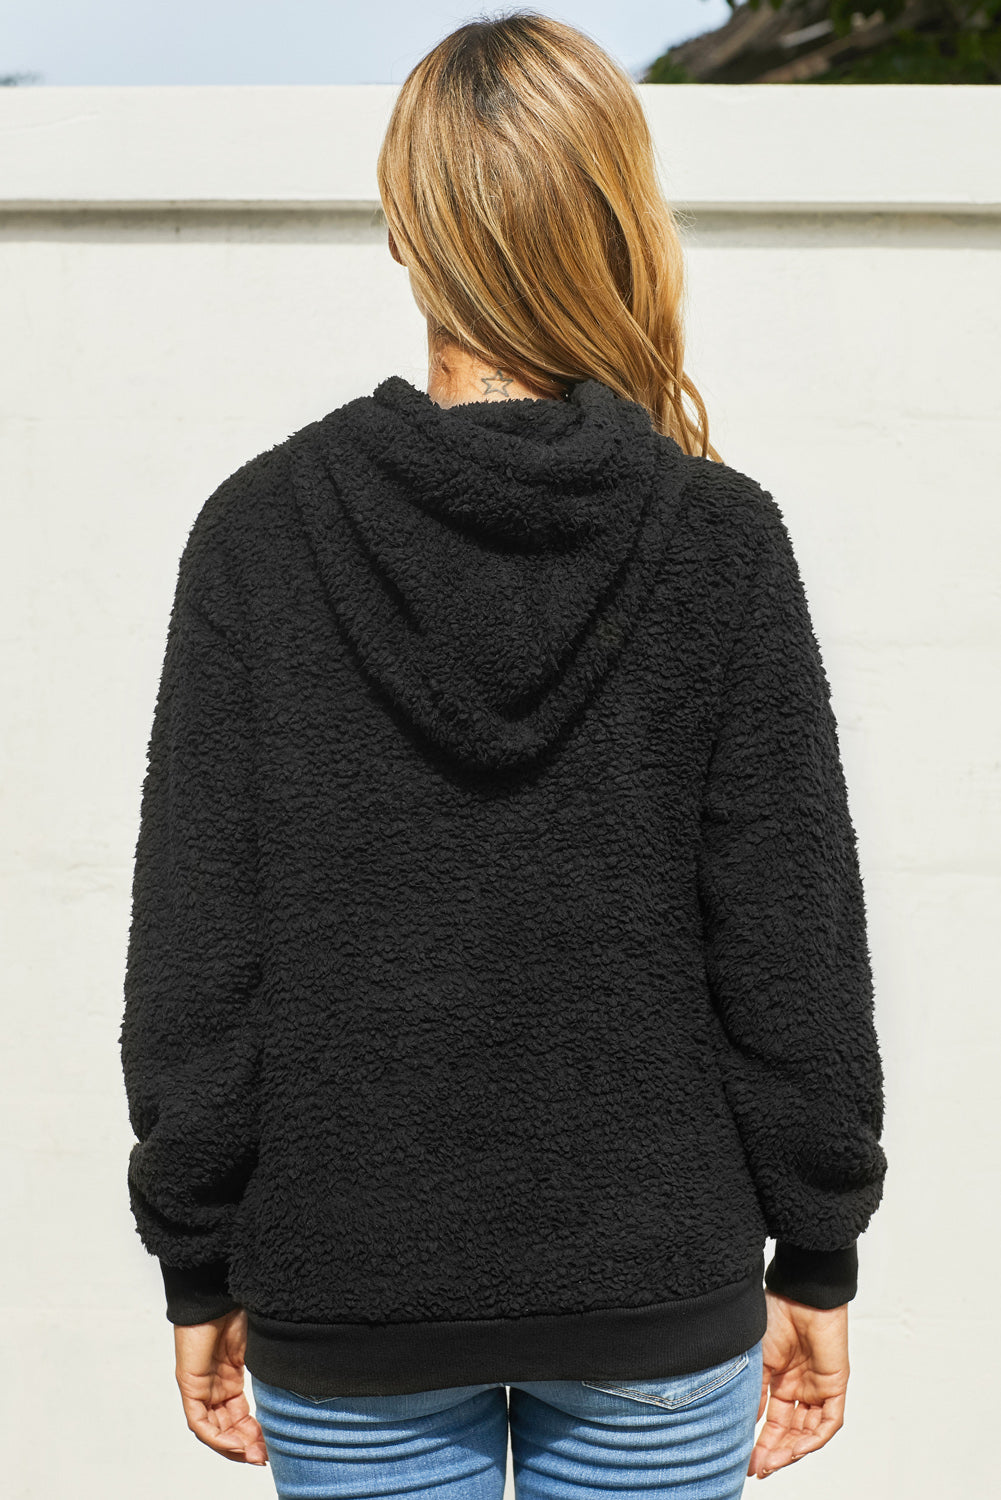 Sherpa Hoodie with Pocket - Women’s Clothing & Accessories - Shirts & Tops - 6 - 2024